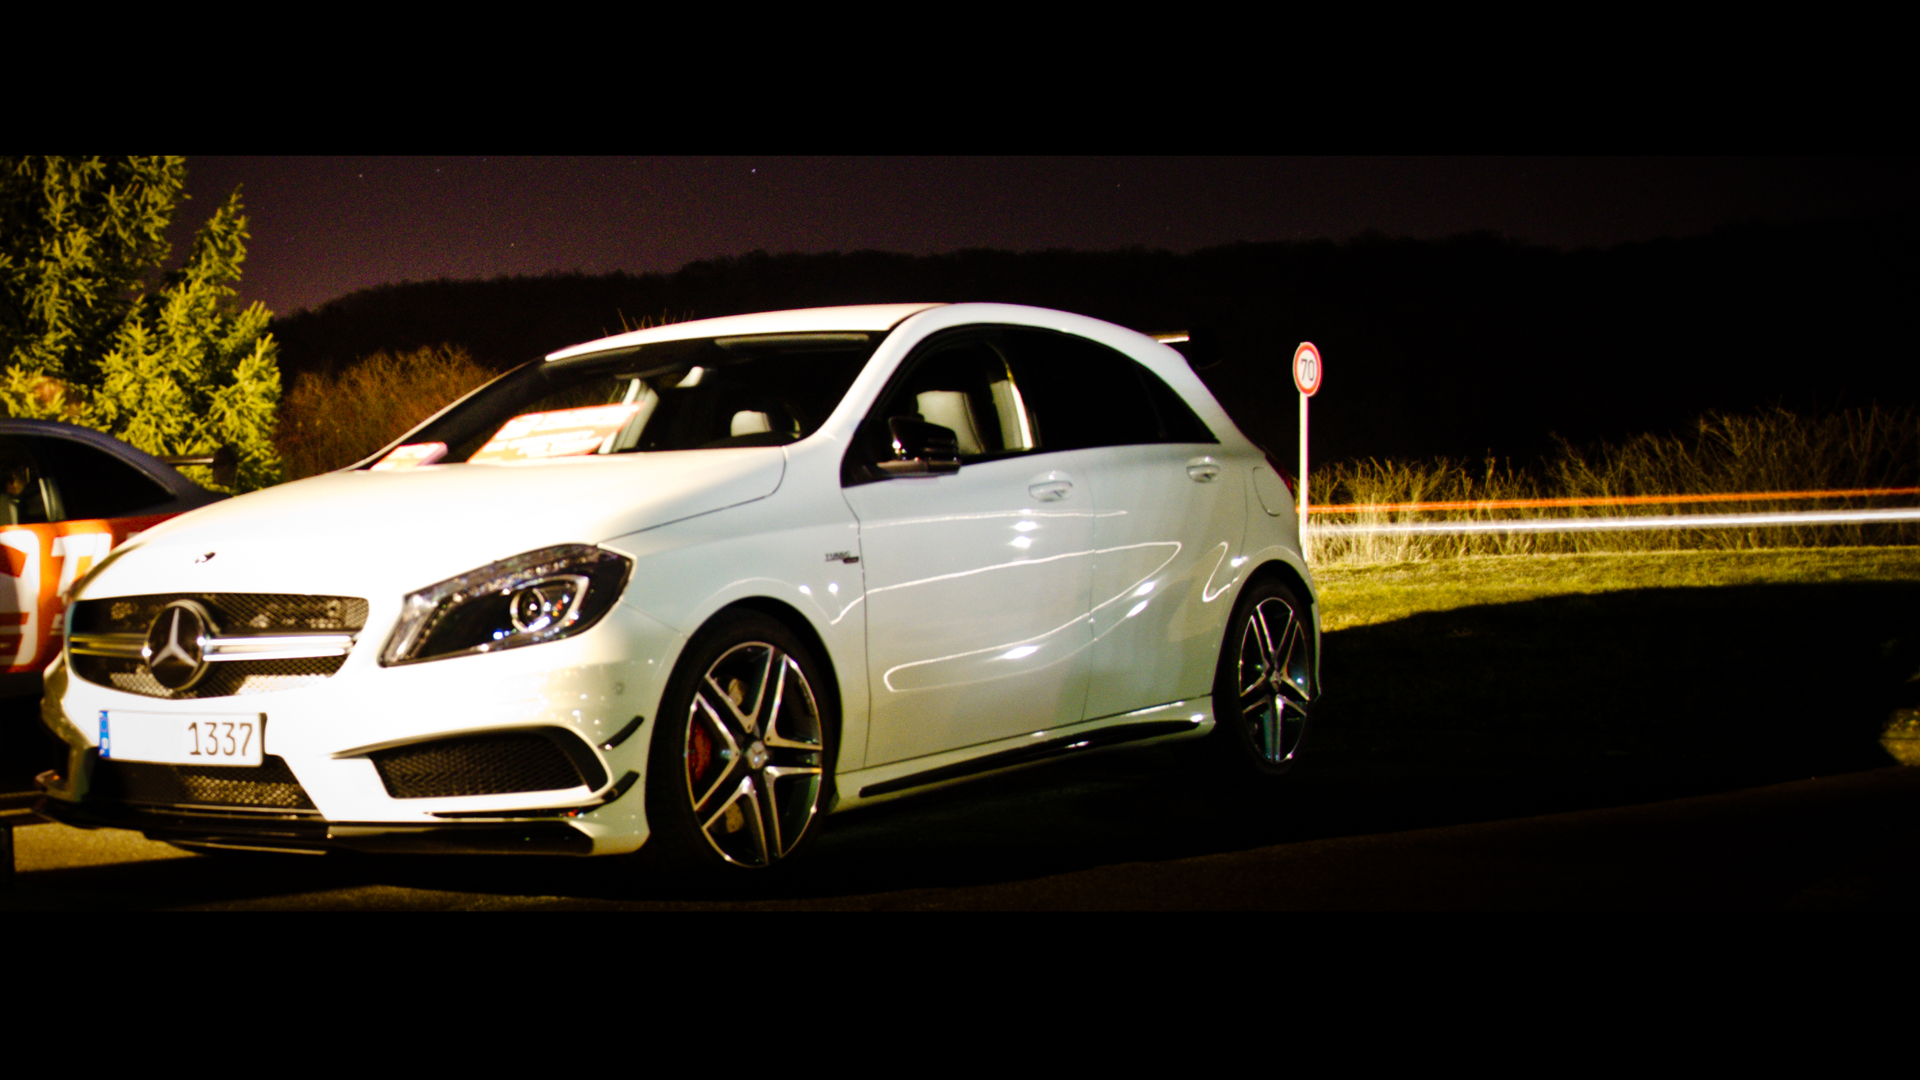 General 1920x1080 car Mercedes-Benz vehicle numbers night white cars